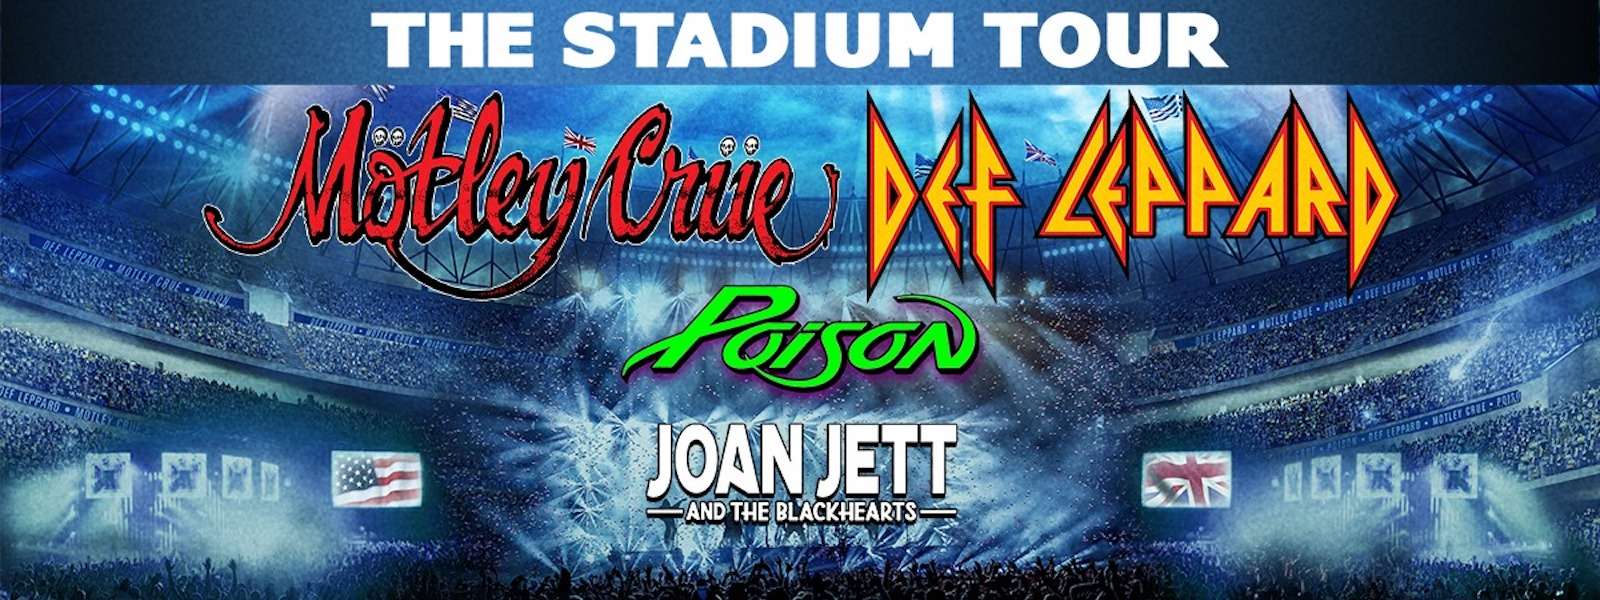 The Stadium Tour Rocked Indianapolis [REVIEW] - Chicago Music Guide